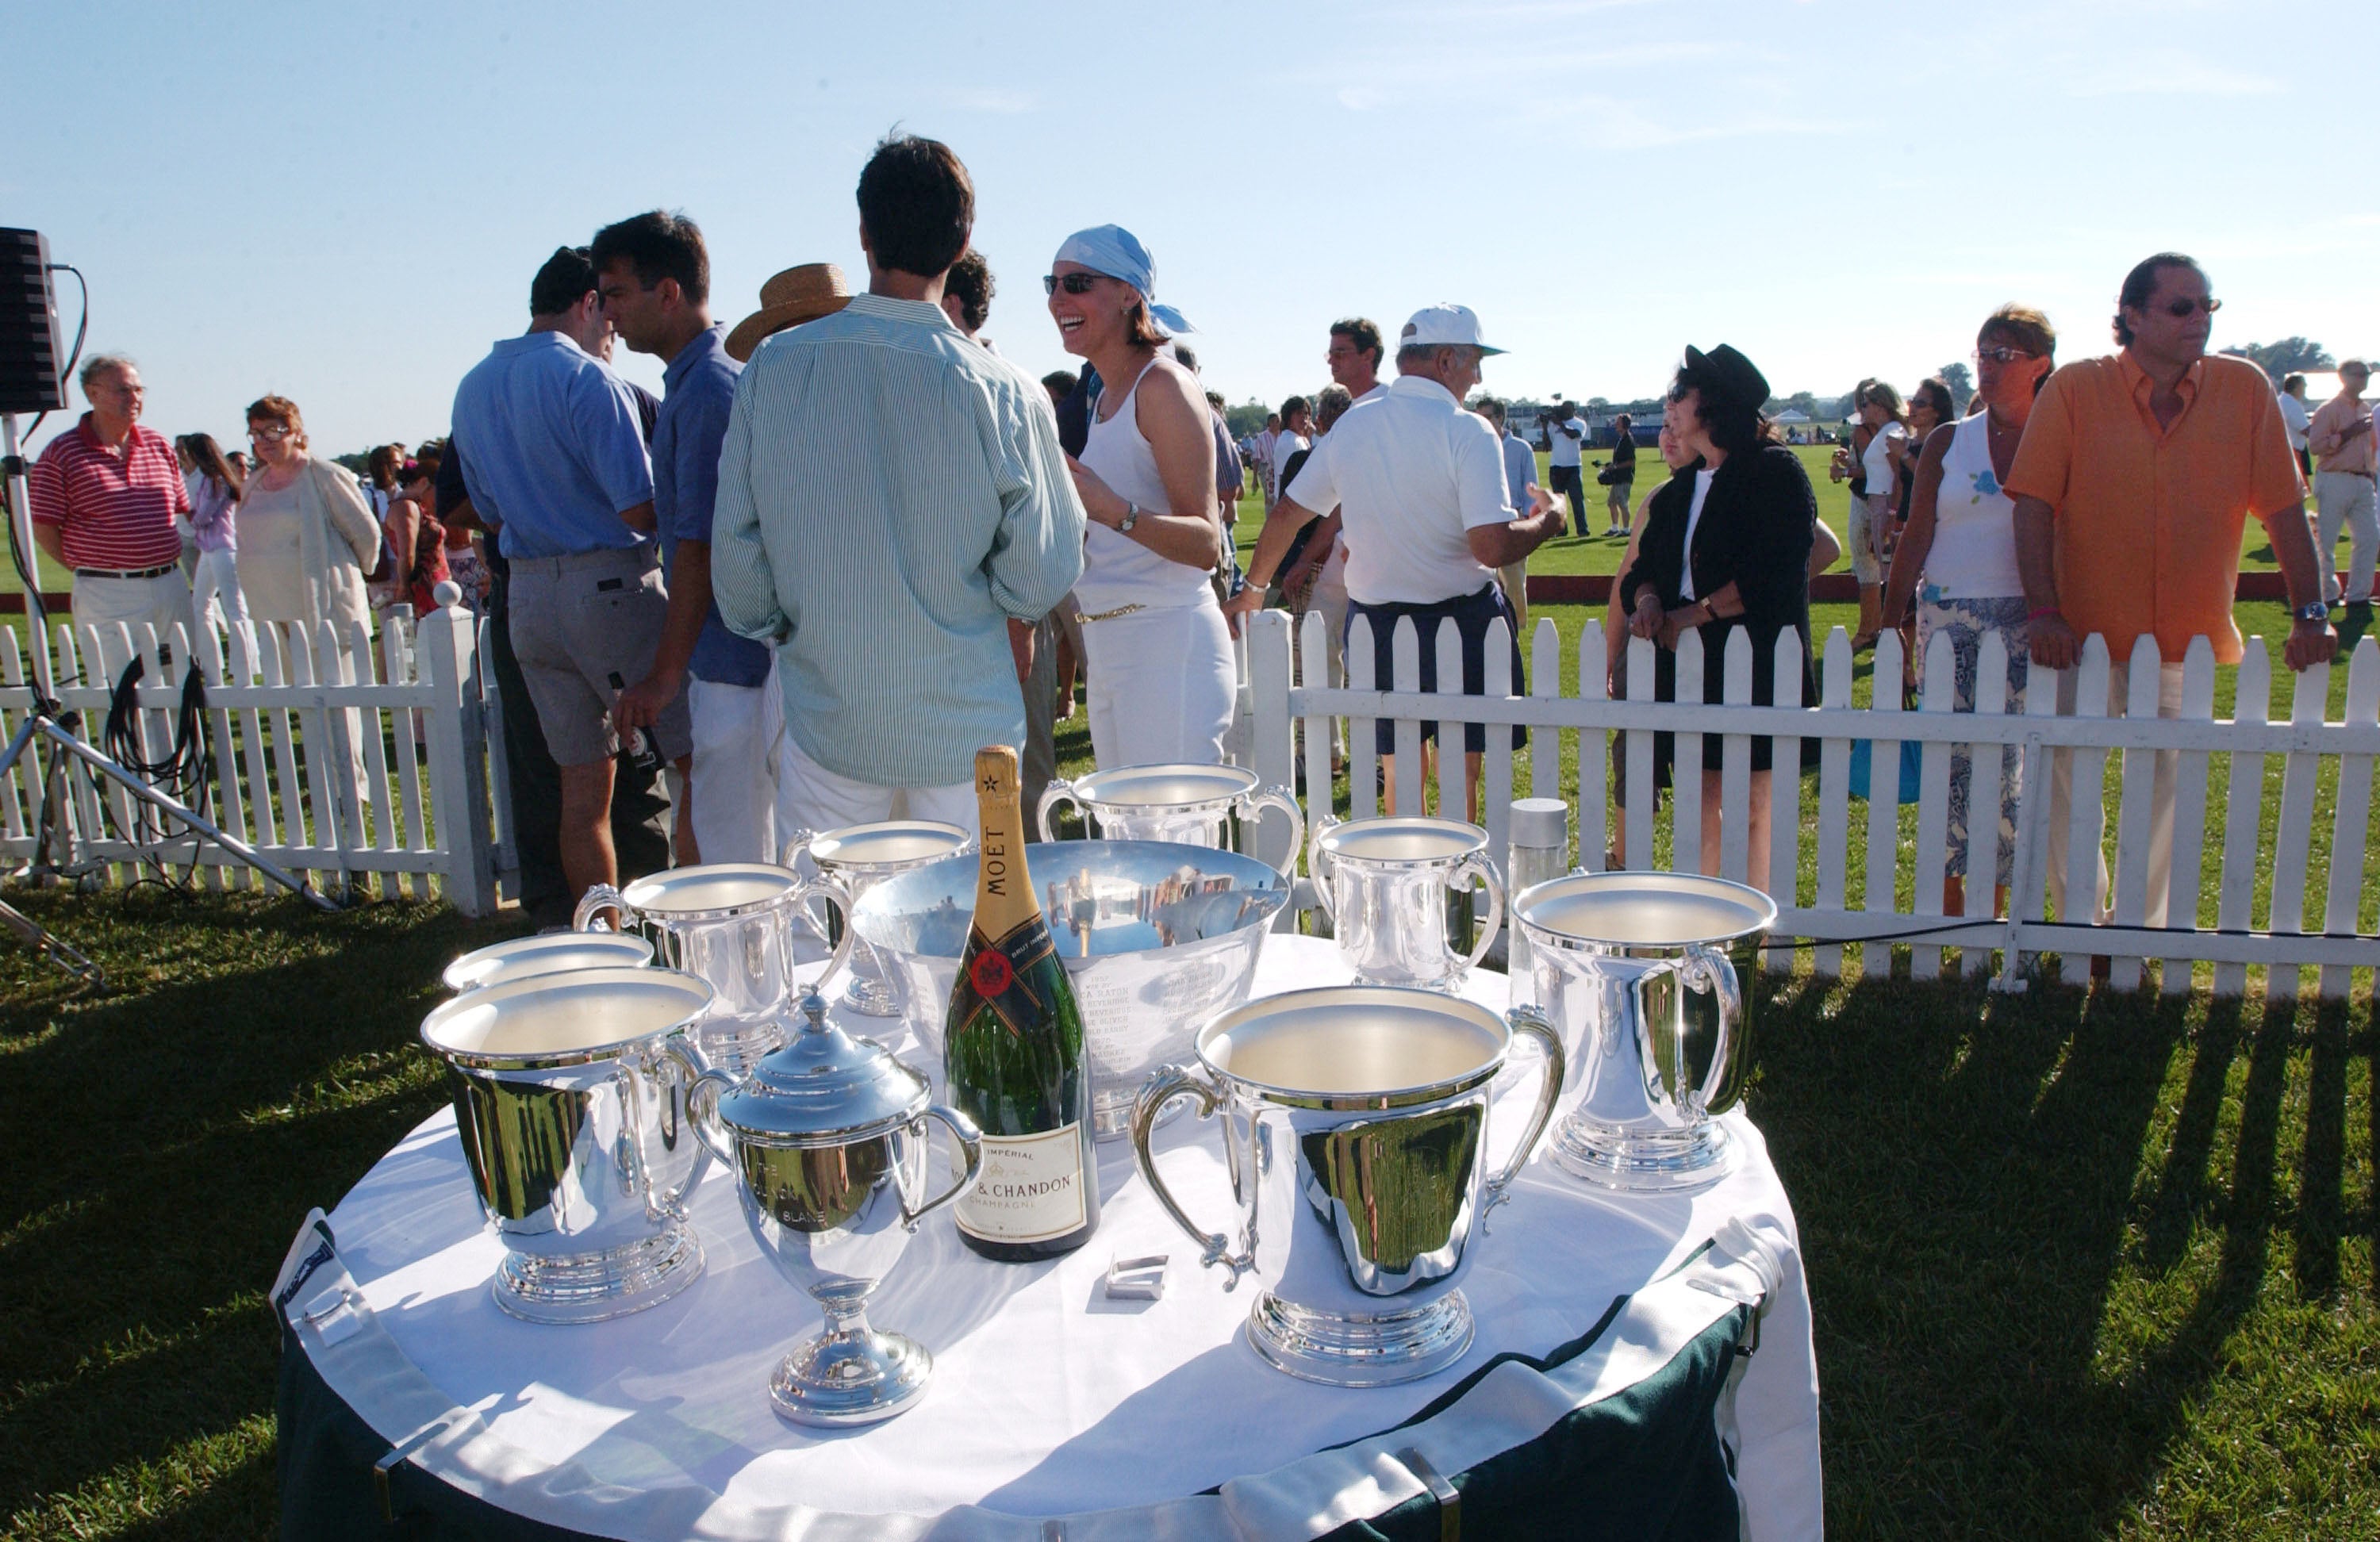 Rich people are complaining about even wealthier people coming to the Hamptons